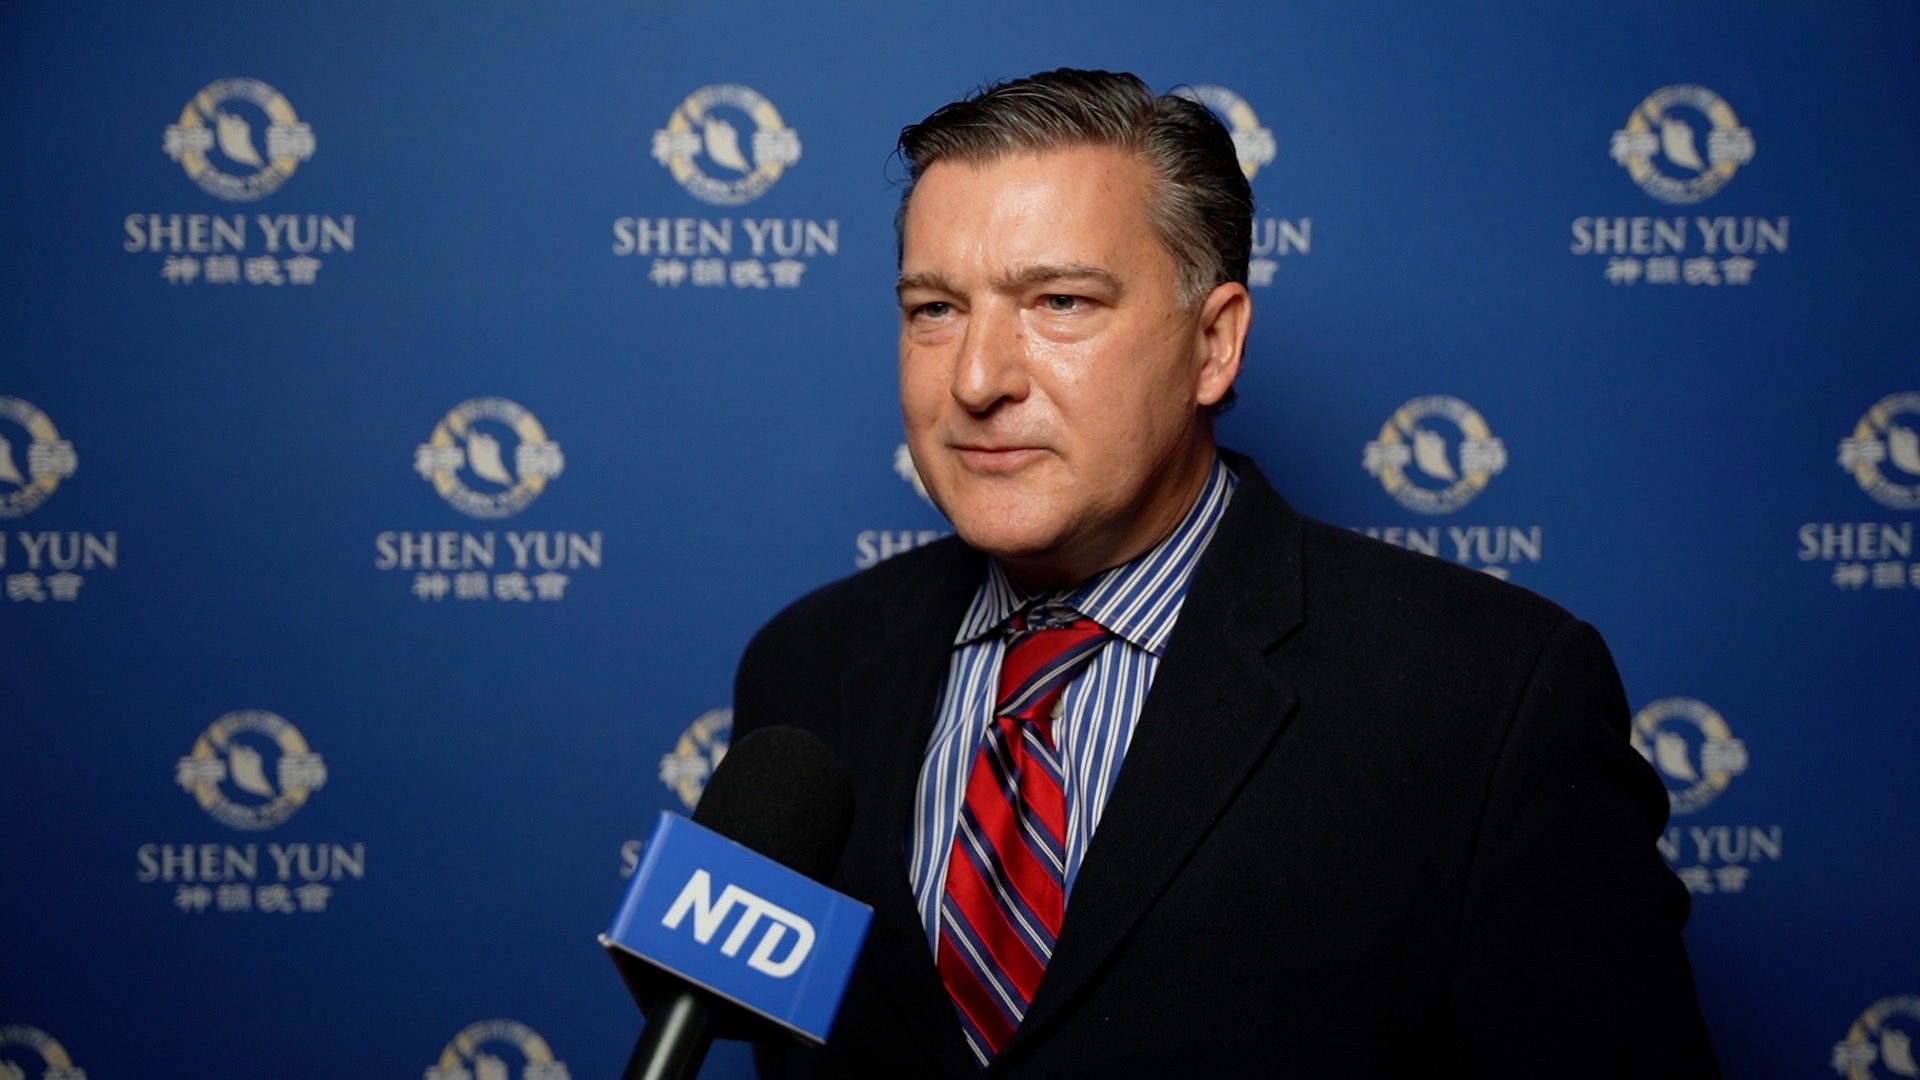 Olympics May Be in Beijing, but ‘True China’ Found in Shen Yun: Lawyer